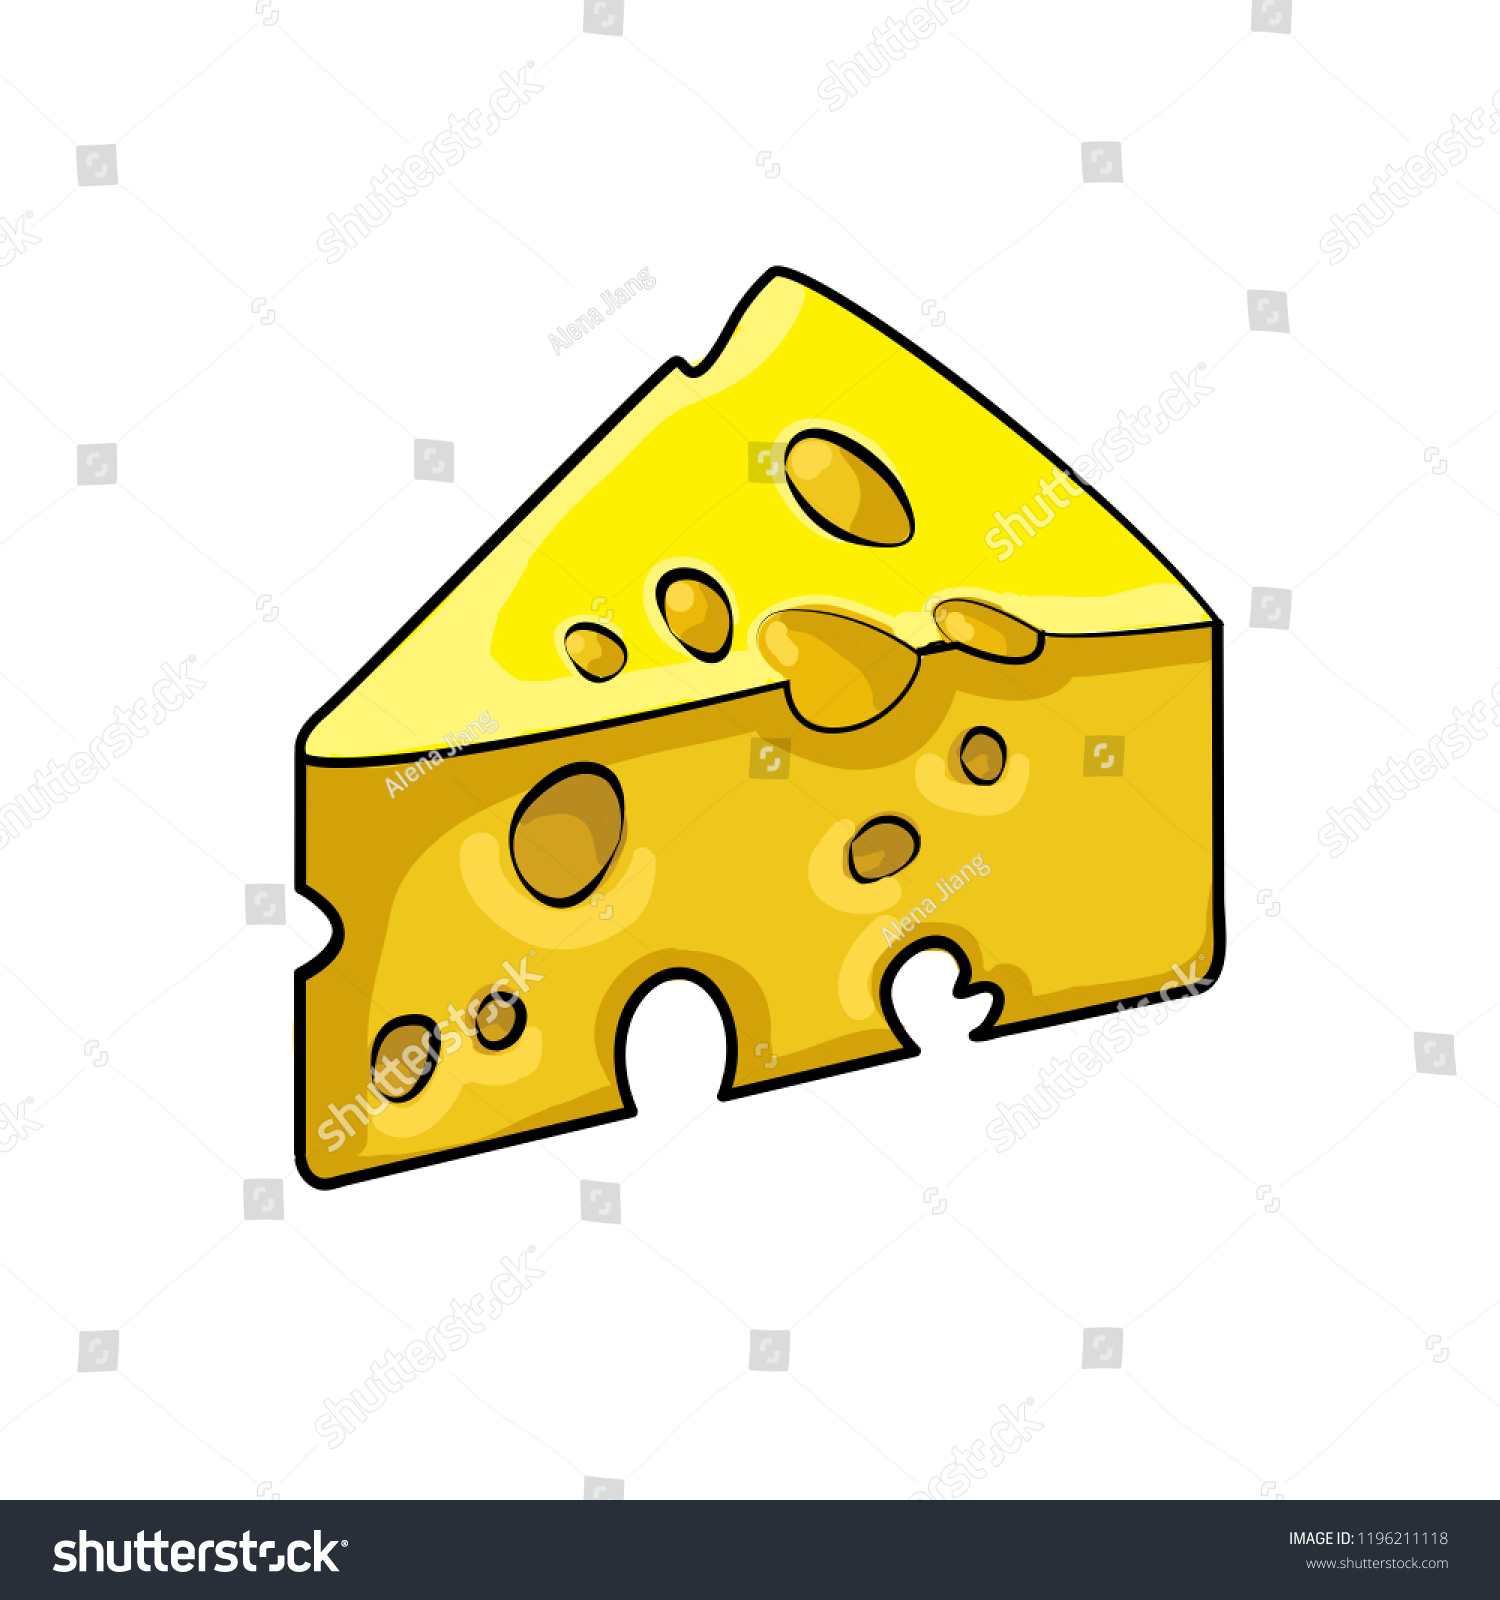 Download Yellow Slice Cheese Vector Illustration Cheese Stock Vector Royalty Free 1196211118 PSD Mockup Templates